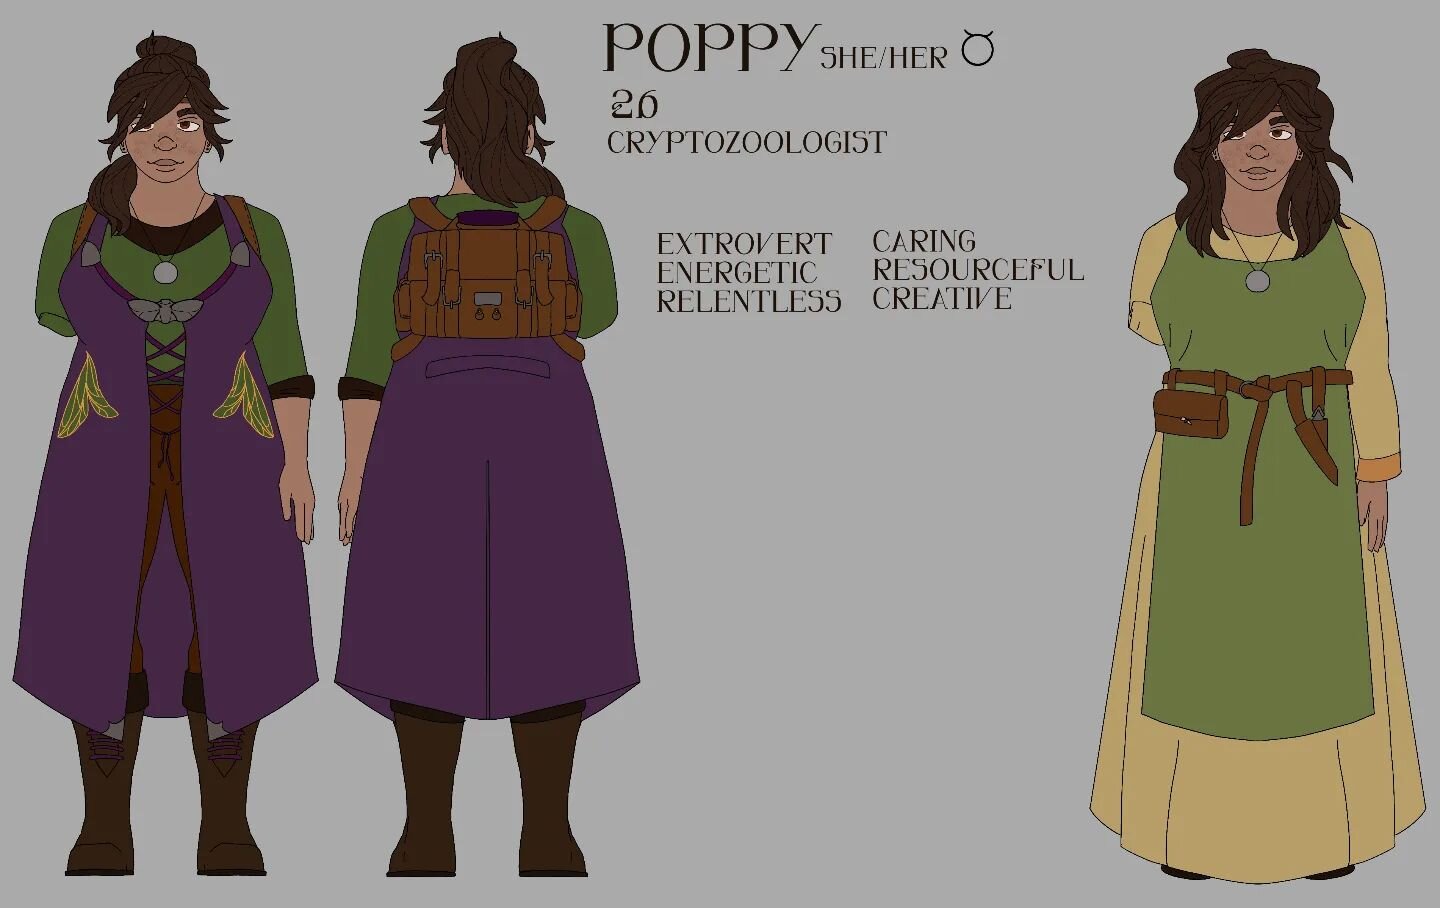 &quot;Come on, Ro. You're really gonna let your dad convince you that it was all just a dream? Bull. Now put your coat on, I want to see just how deep down this place goes.&quot;

MC 4/5 of under mountains 🏔️ this is Poppy! She studies the monsters 